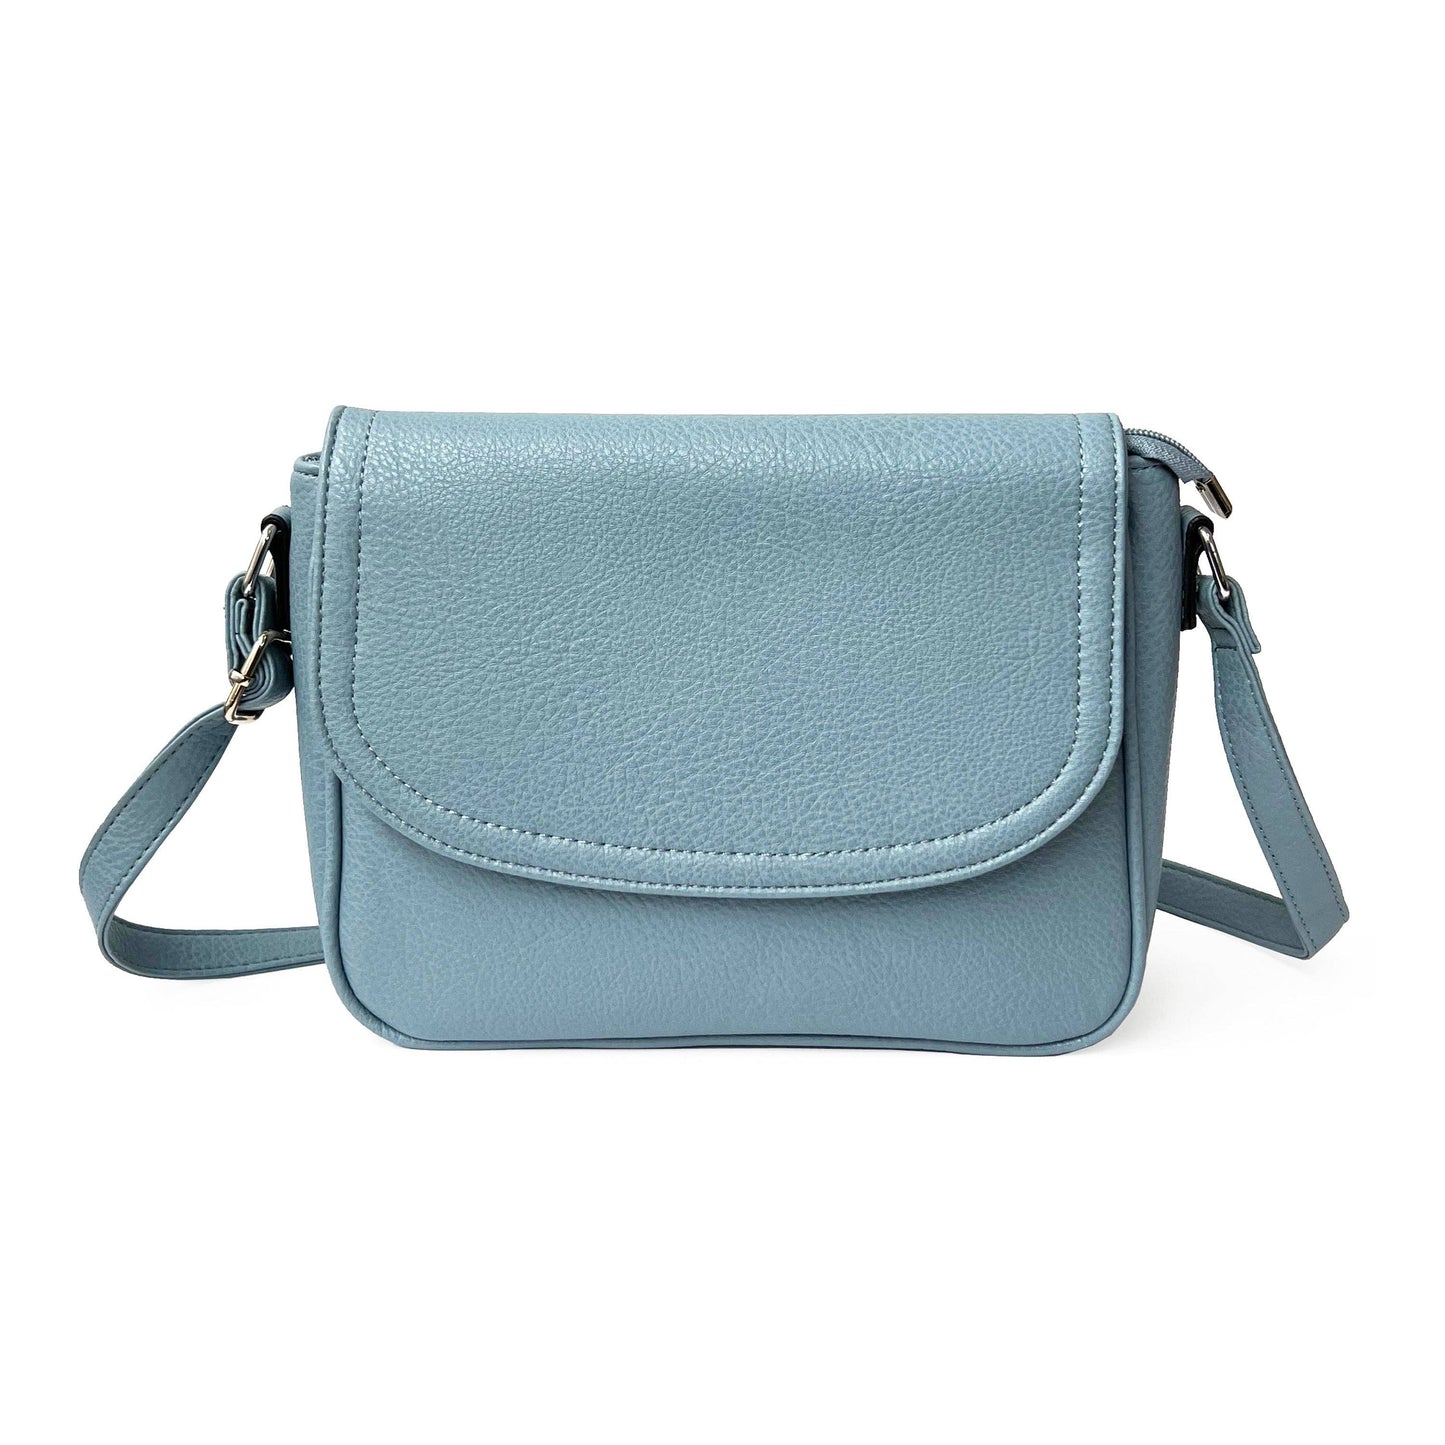 CROSSBODY WITH FRONT FLAP: POWDER BLUE